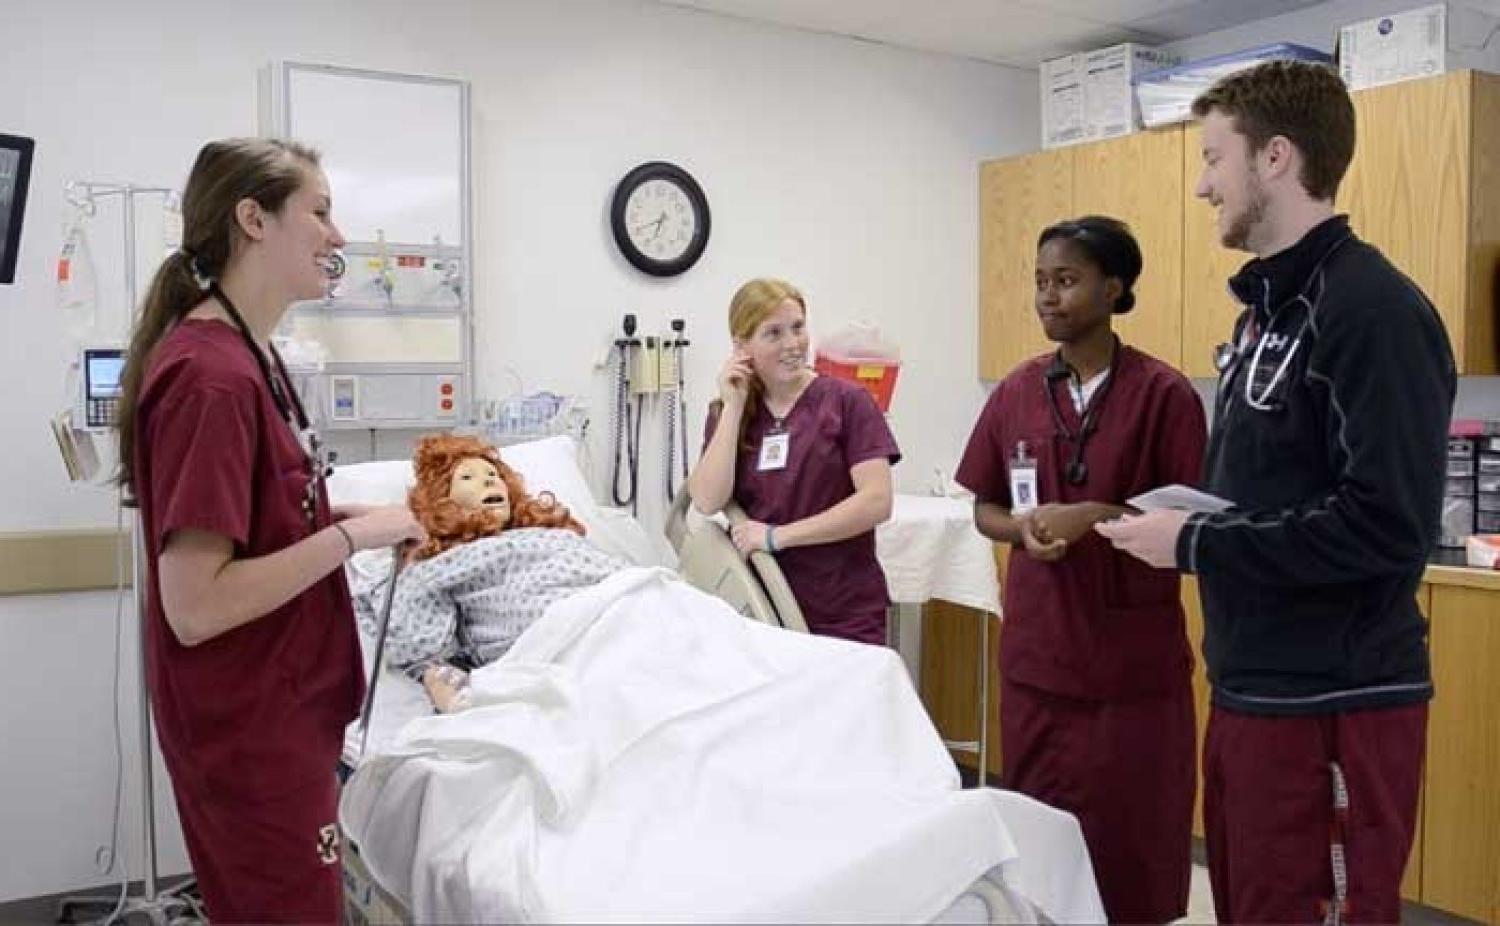 students in scrubs in a hospital setting